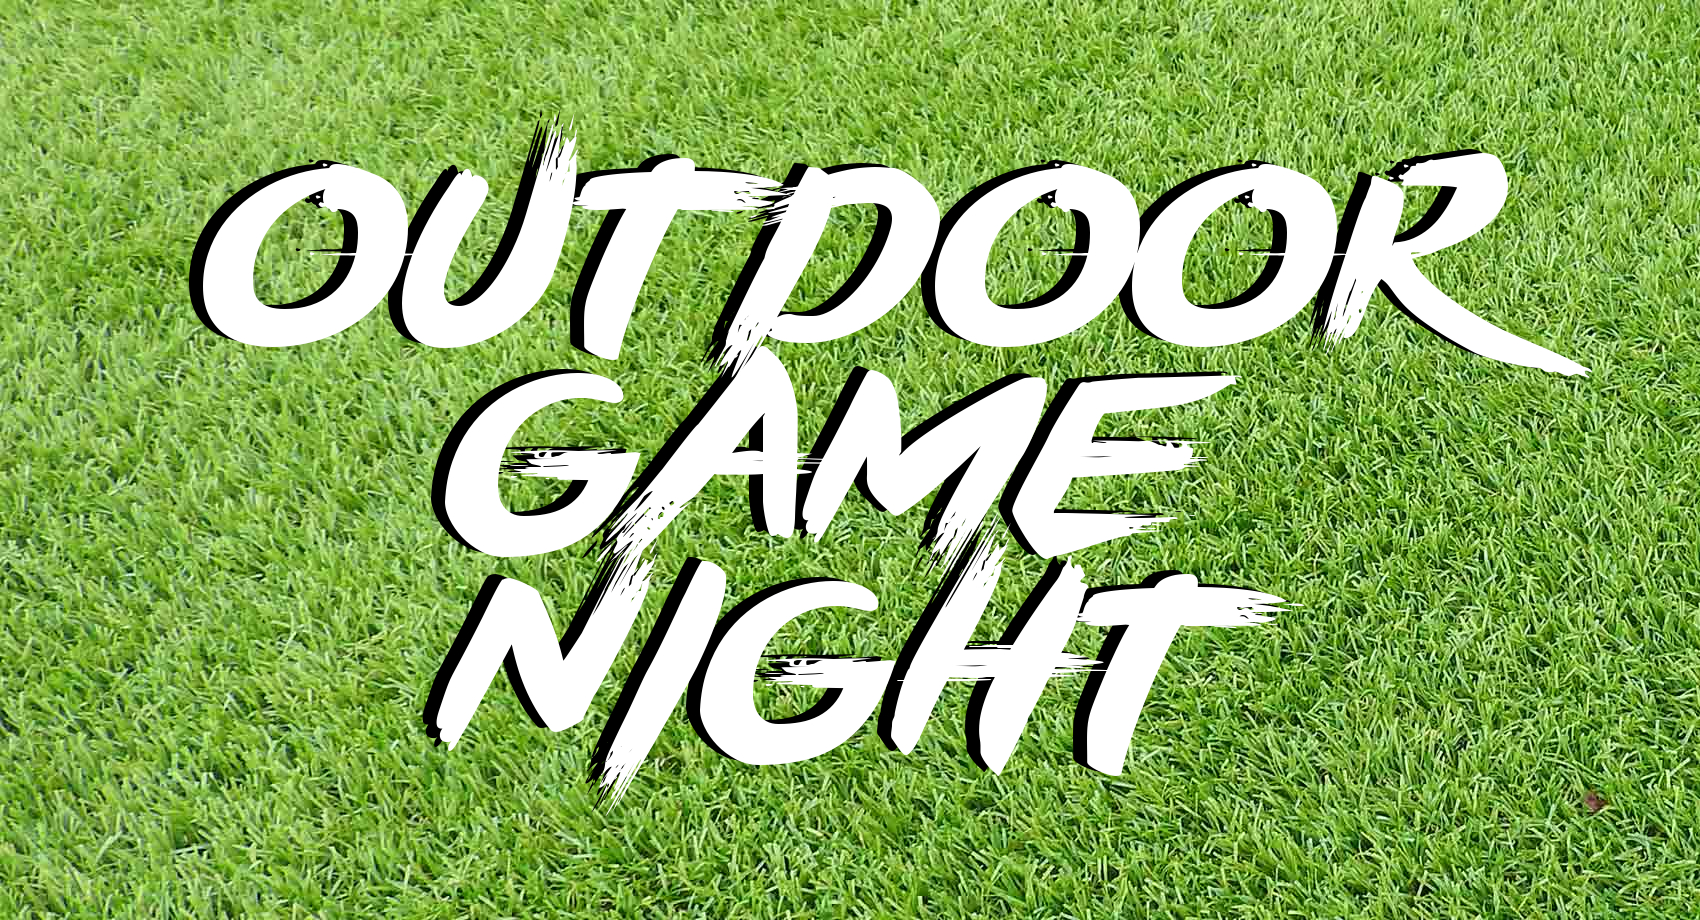 Outdoor Game Night written in bold letters on a lawn.